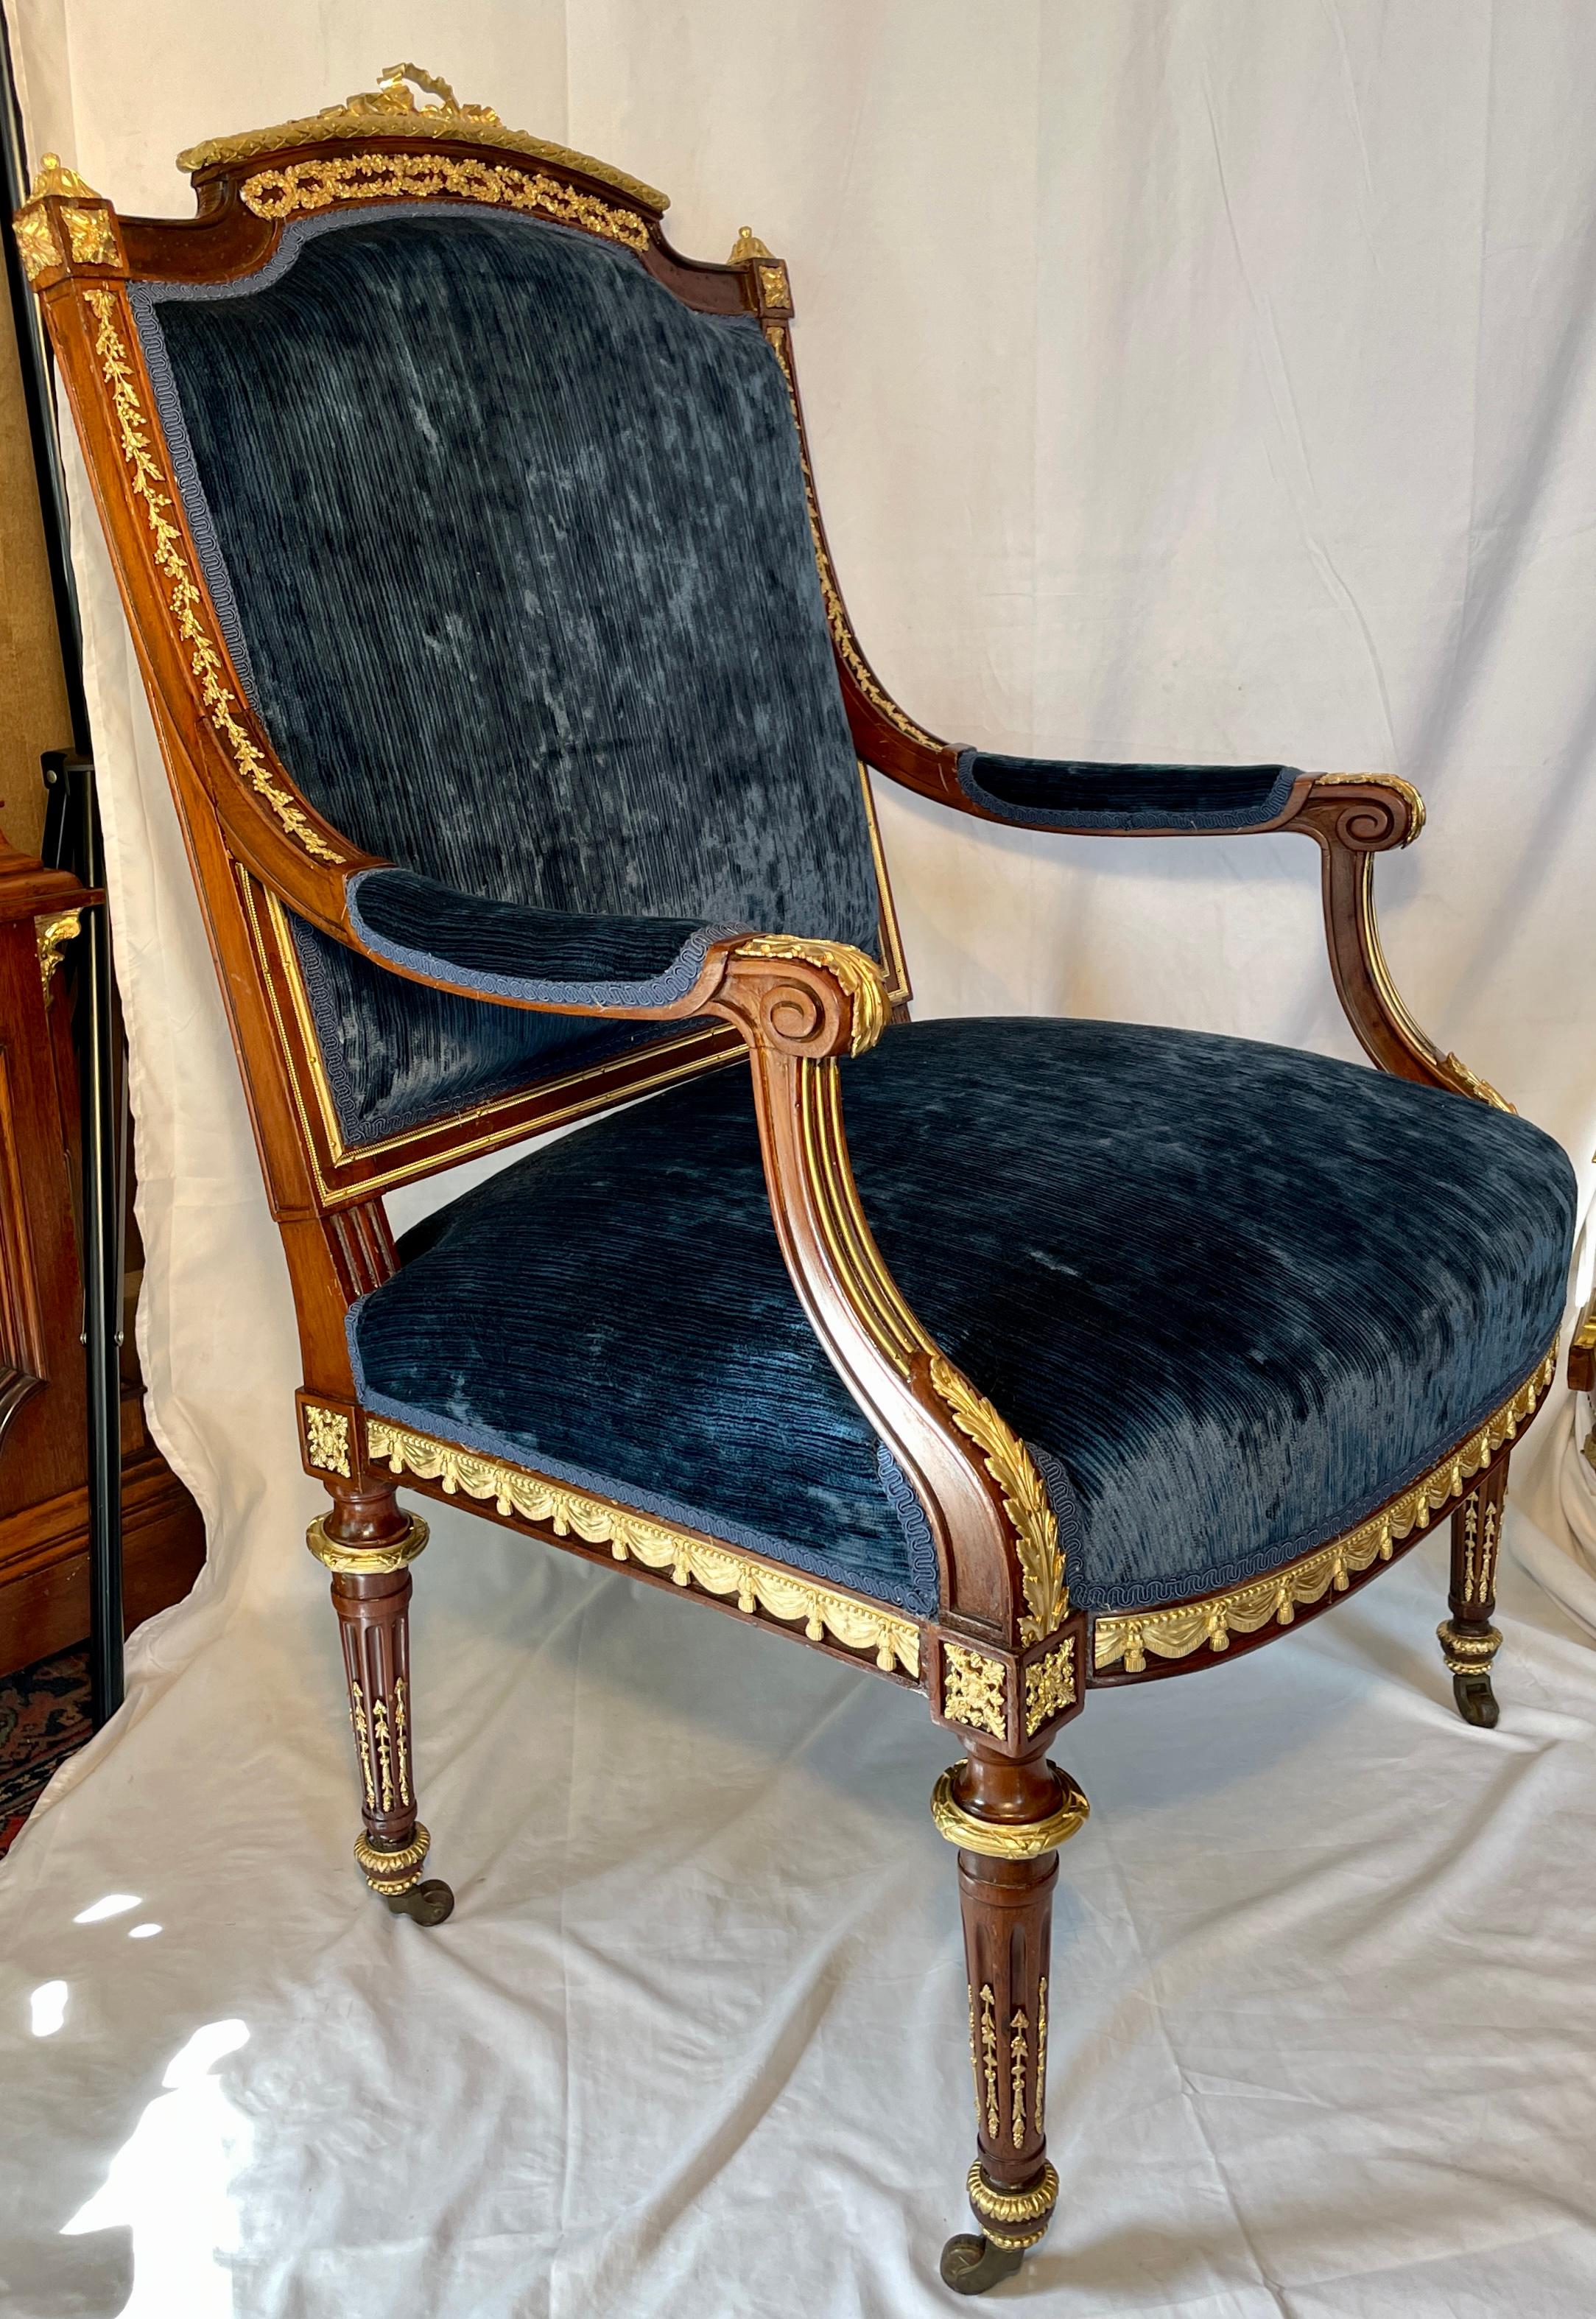 Antique French Gold Bronze & Mahogany Armchair with Delicate Trim, circa 1875 In Good Condition For Sale In New Orleans, LA